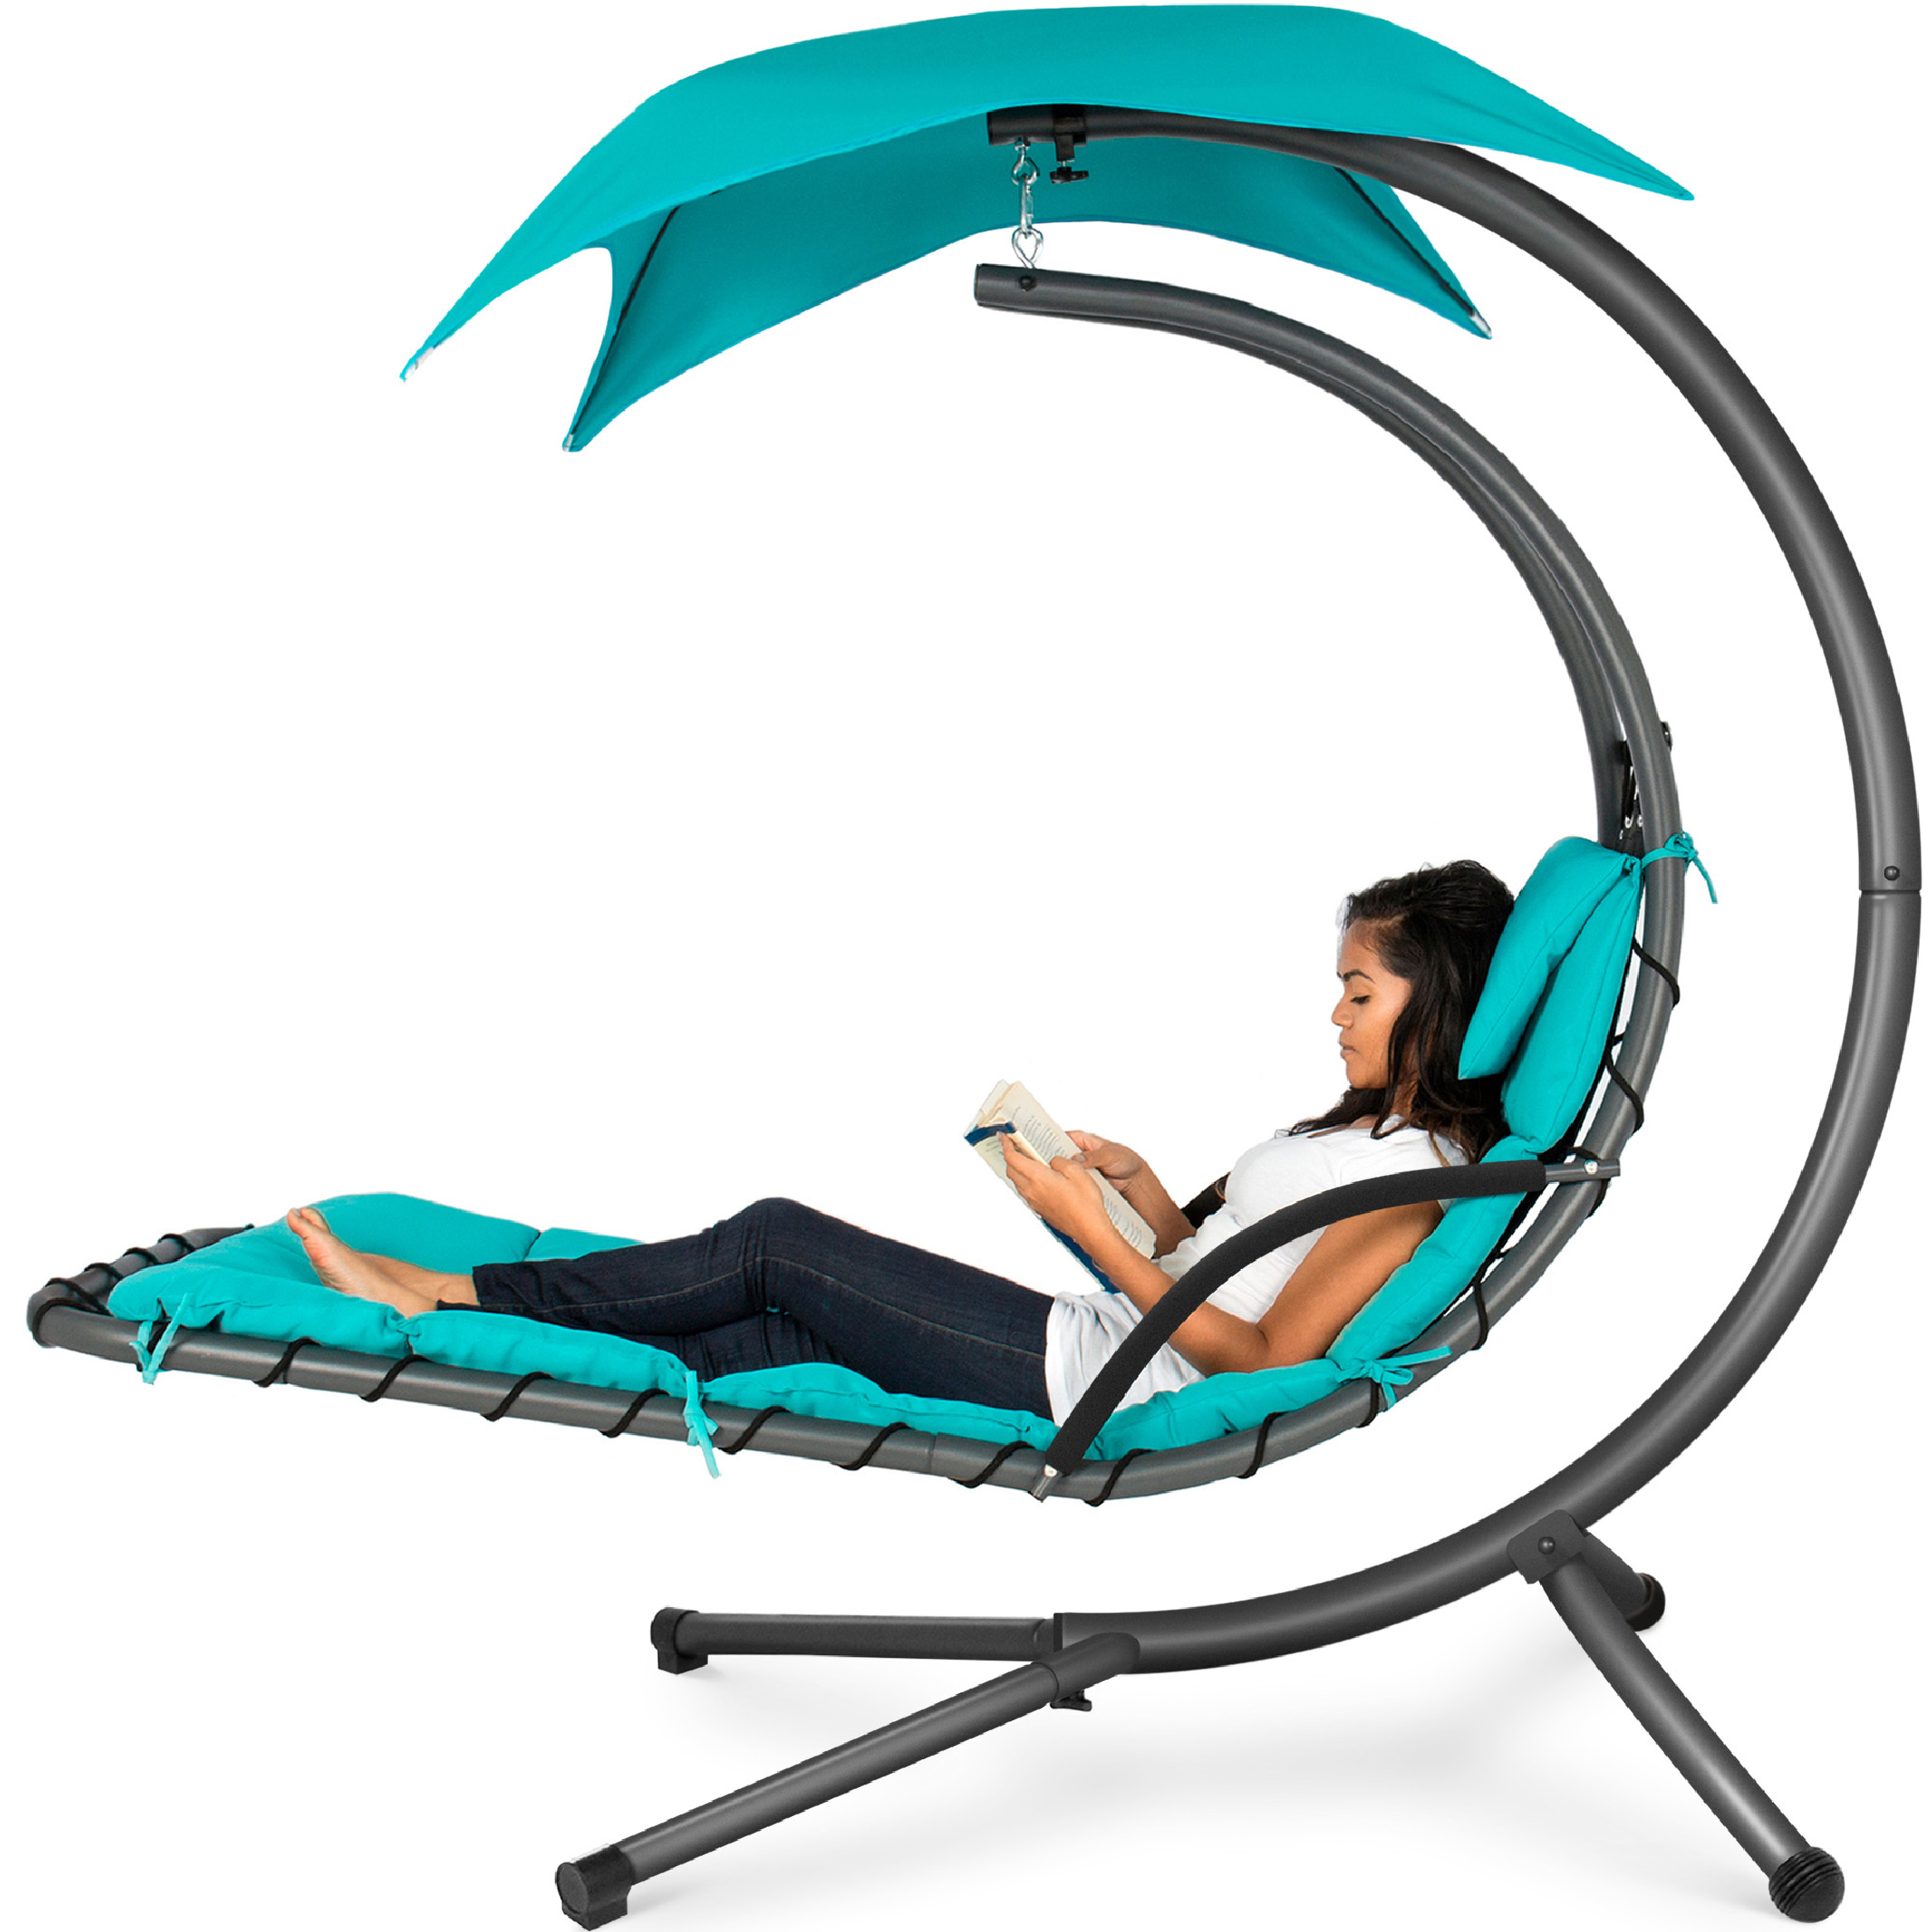 Best Choice Products Hanging Curved Chaise Lounge Chair Swing for Backyard, Patio w/ Pillow, Shade, Stand - Teal - image 1 of 8